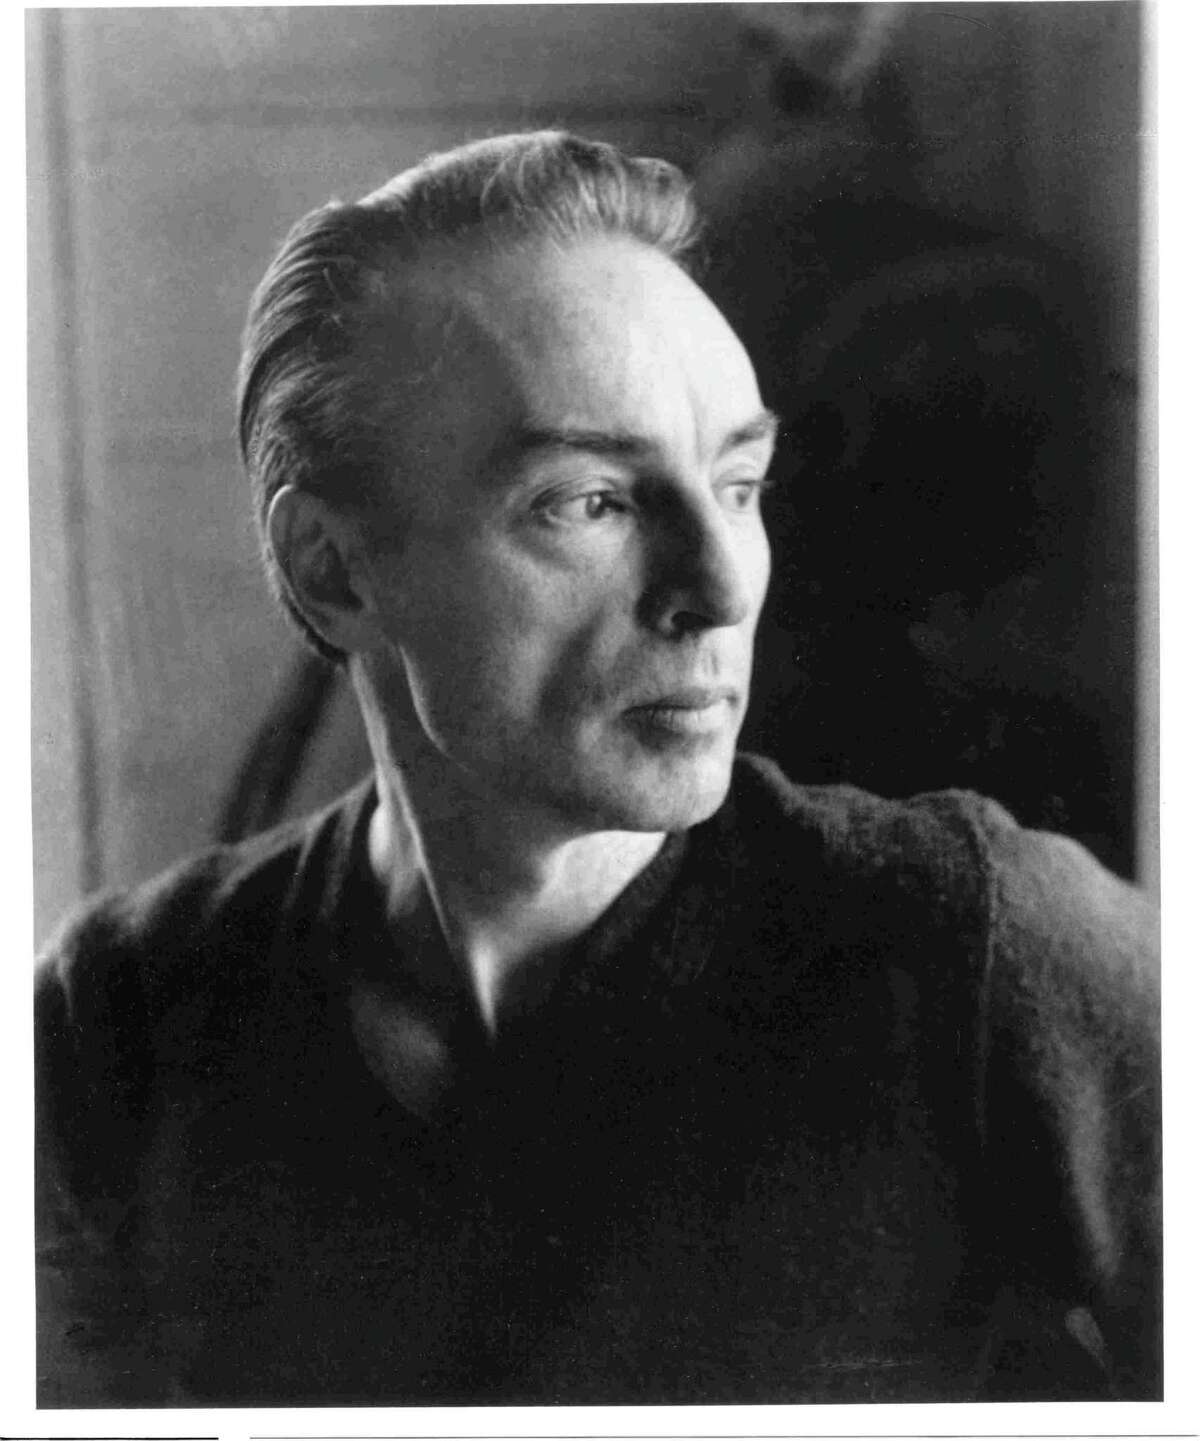 George Balanchine in a portrait from the 1950s taken by one of his wives, the ballerina Tanaquil LeClerq. From the New York City Ballet archive.